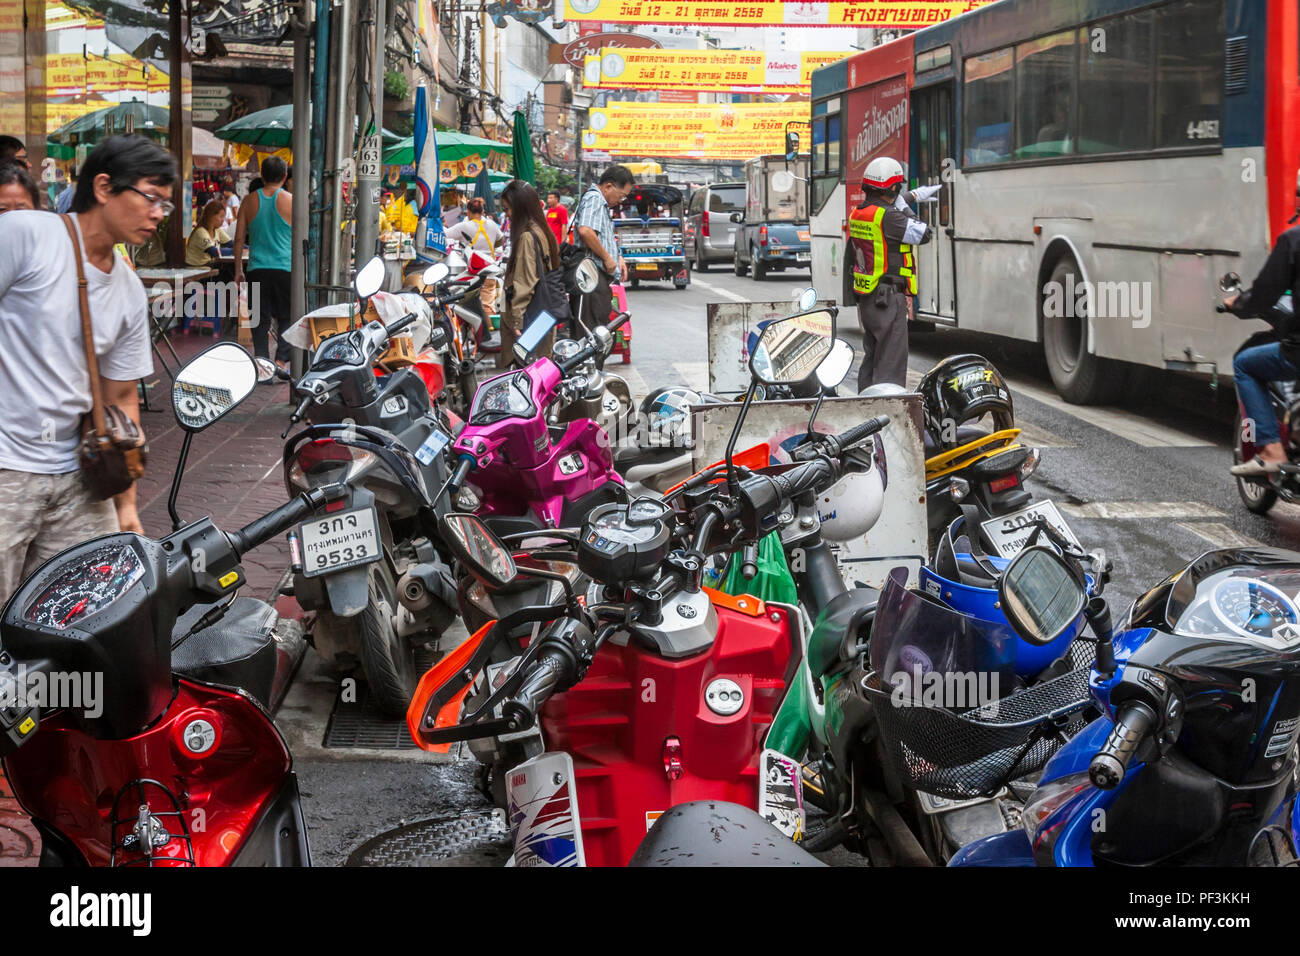 10/19/2015 editorial: Chinatown, Bangkok public motorcycle parking on the city streets. Stock Photo